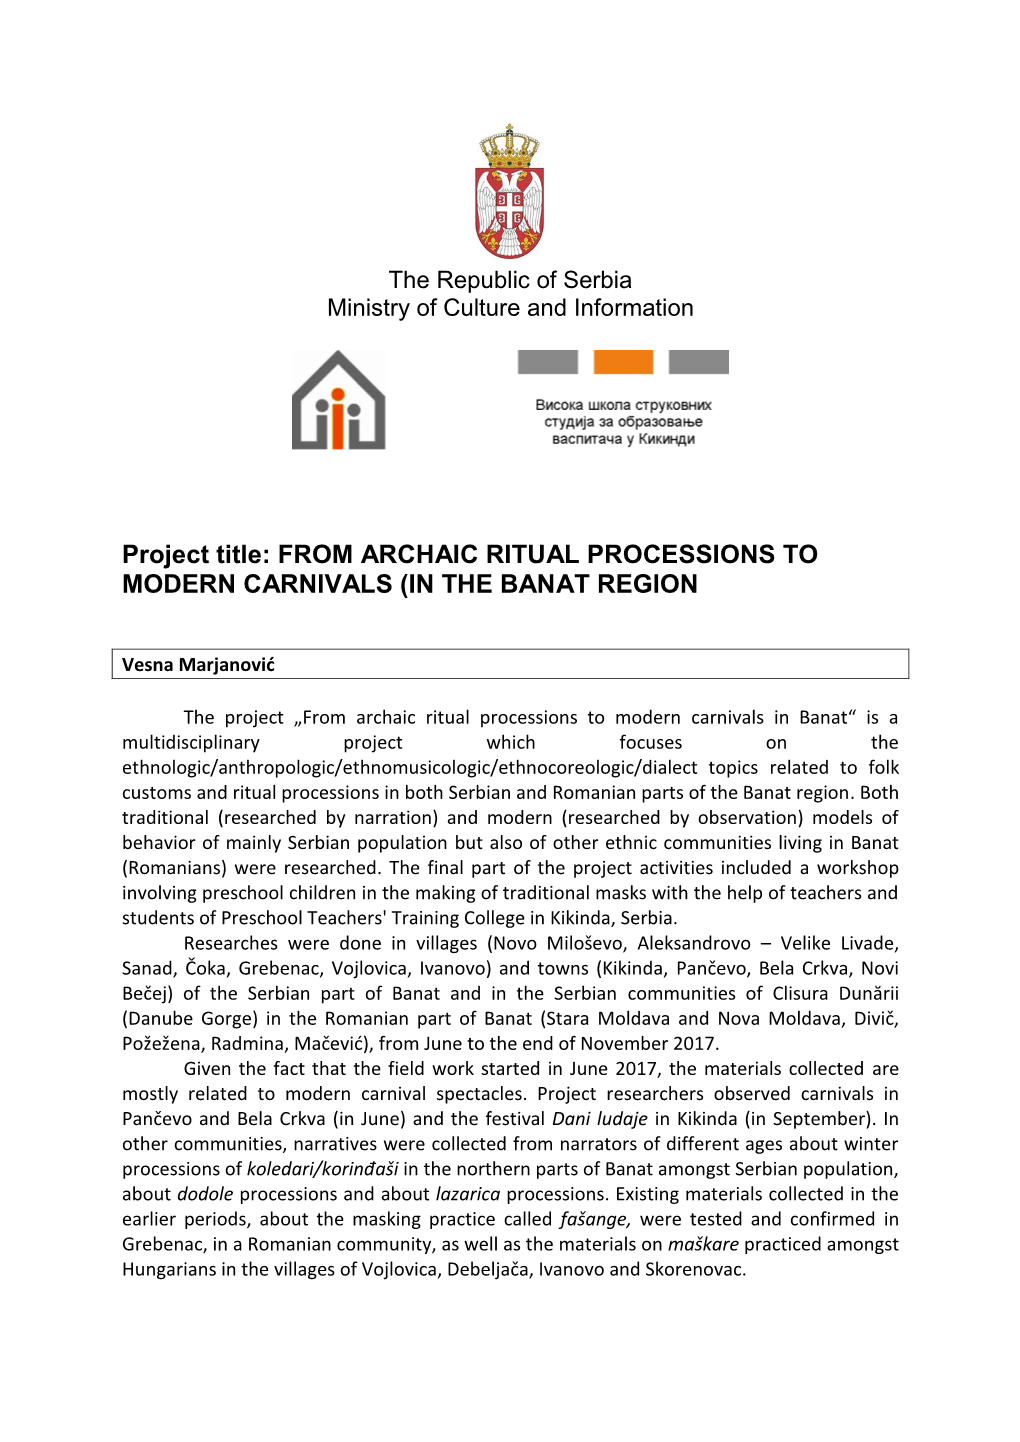 Project Title: from ARCHAIC RITUAL PROCESSIONS to MODERN CARNIVALS (IN the BANAT REGION